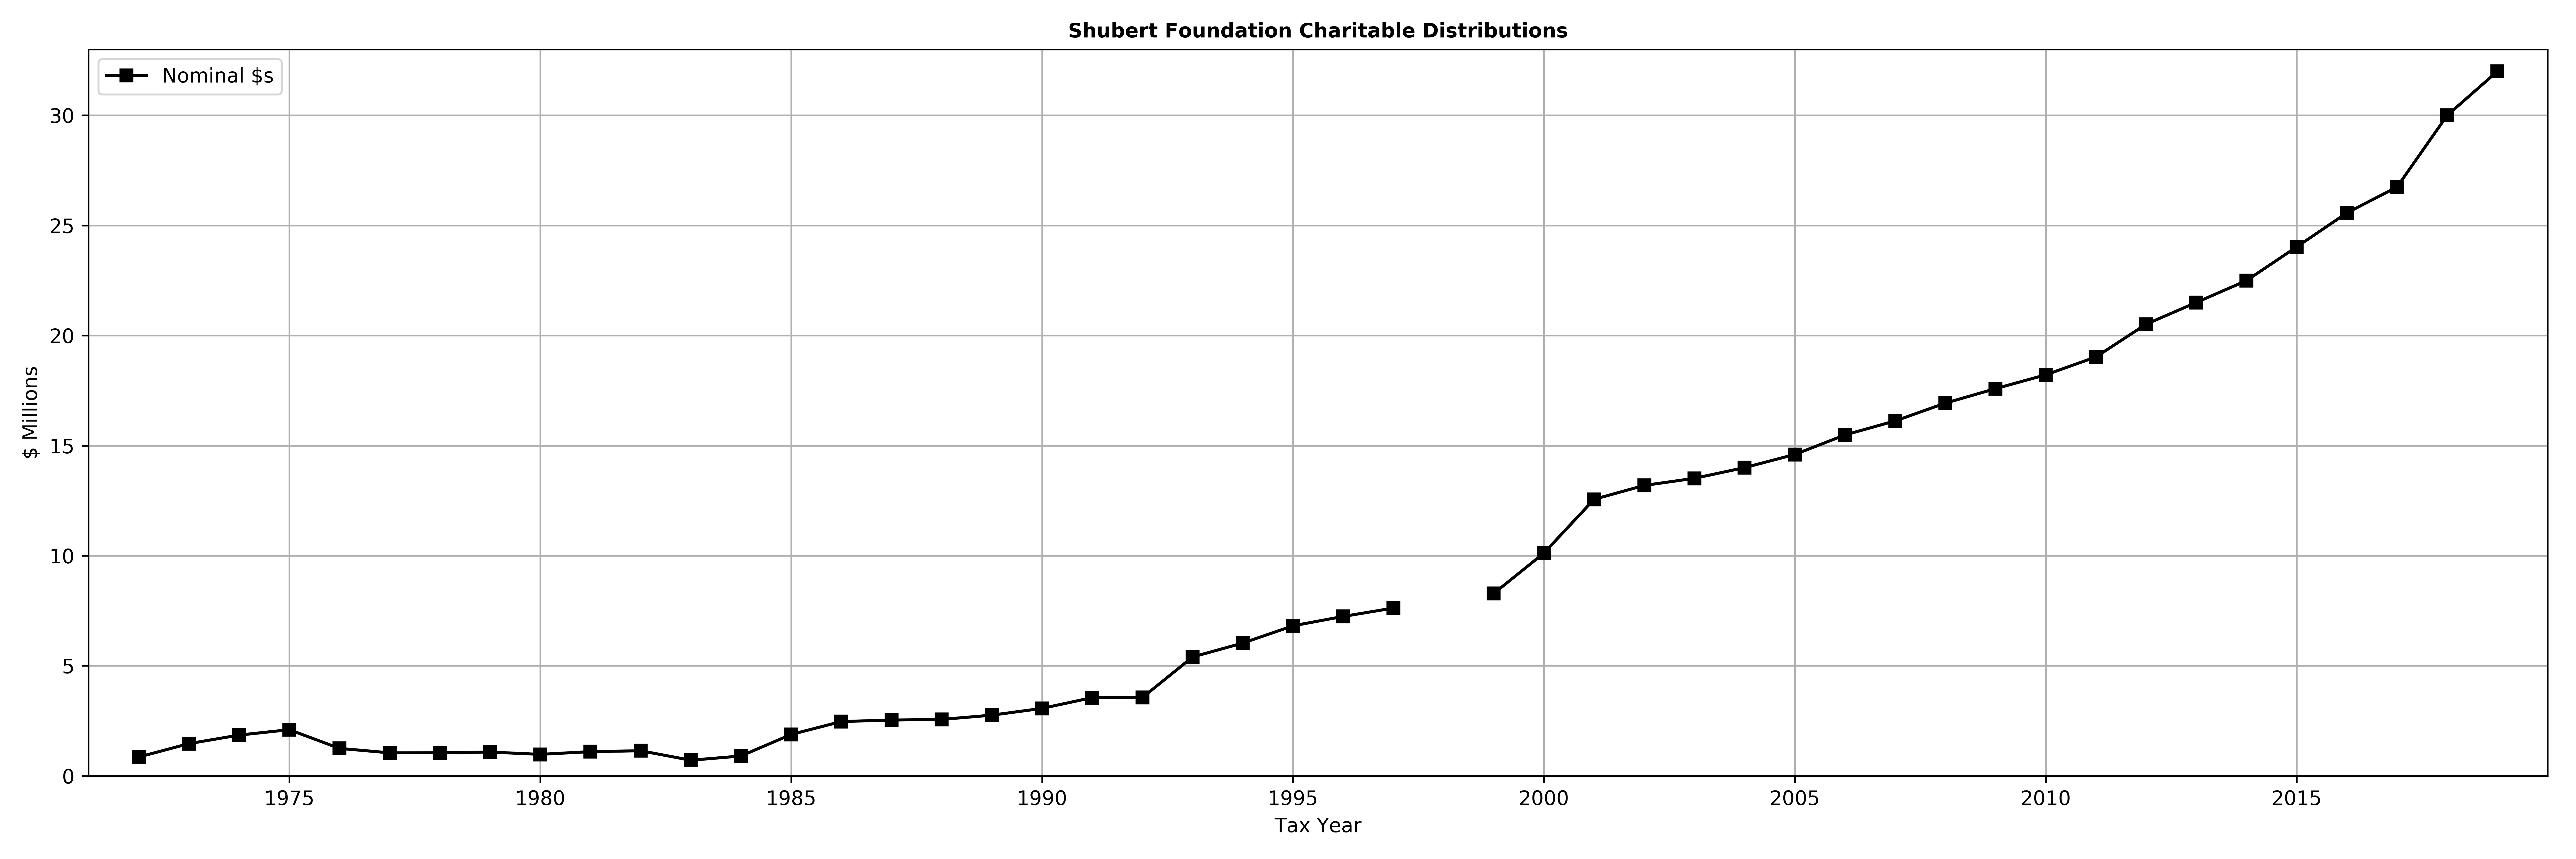 Distributions Over Time